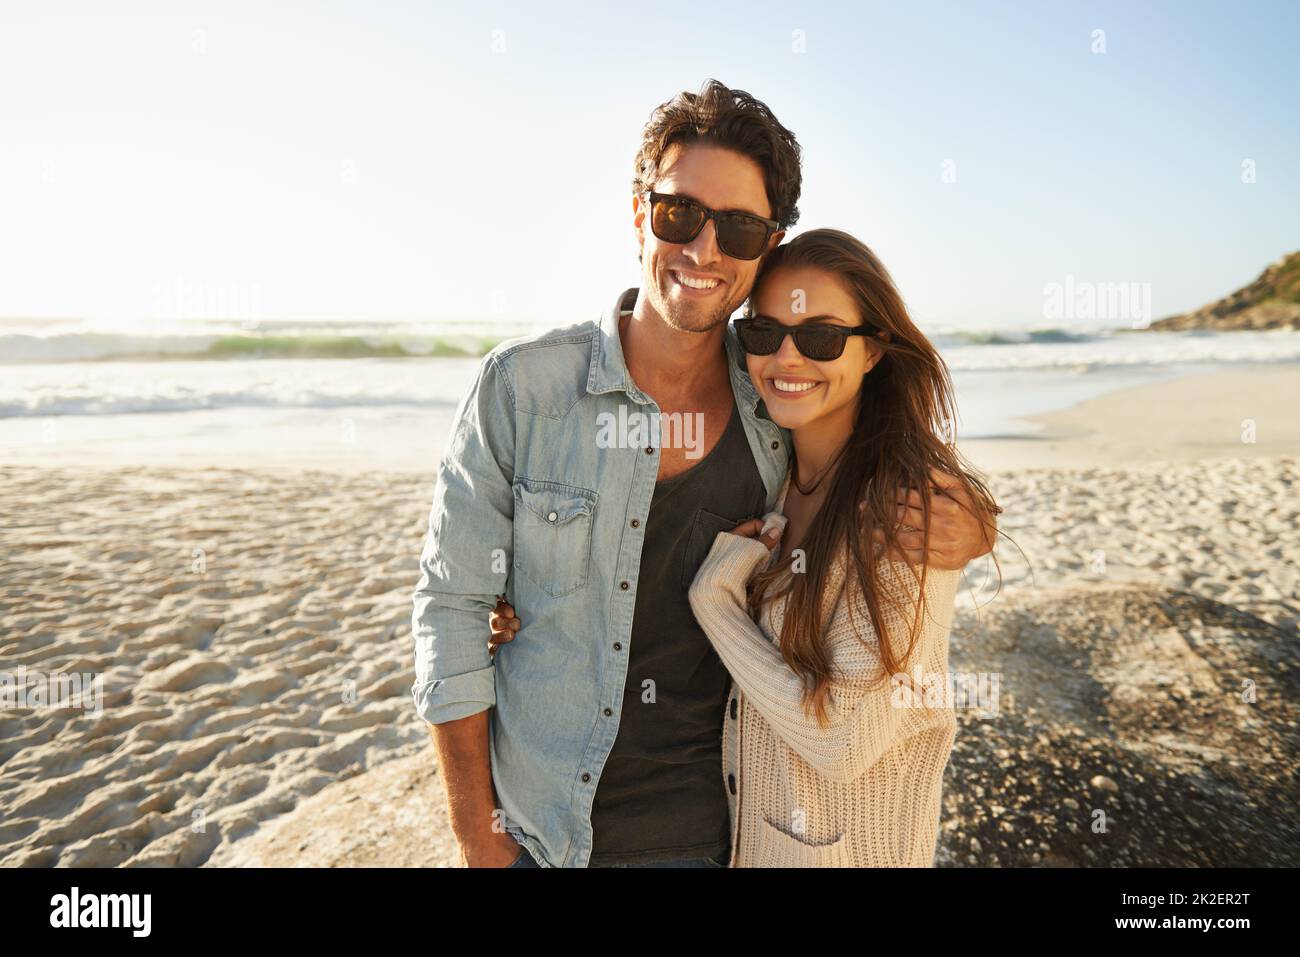 Enjoying the sea breeze and sun. Shot of a beautiful young couple standing side by side on the beach. Stock Photo